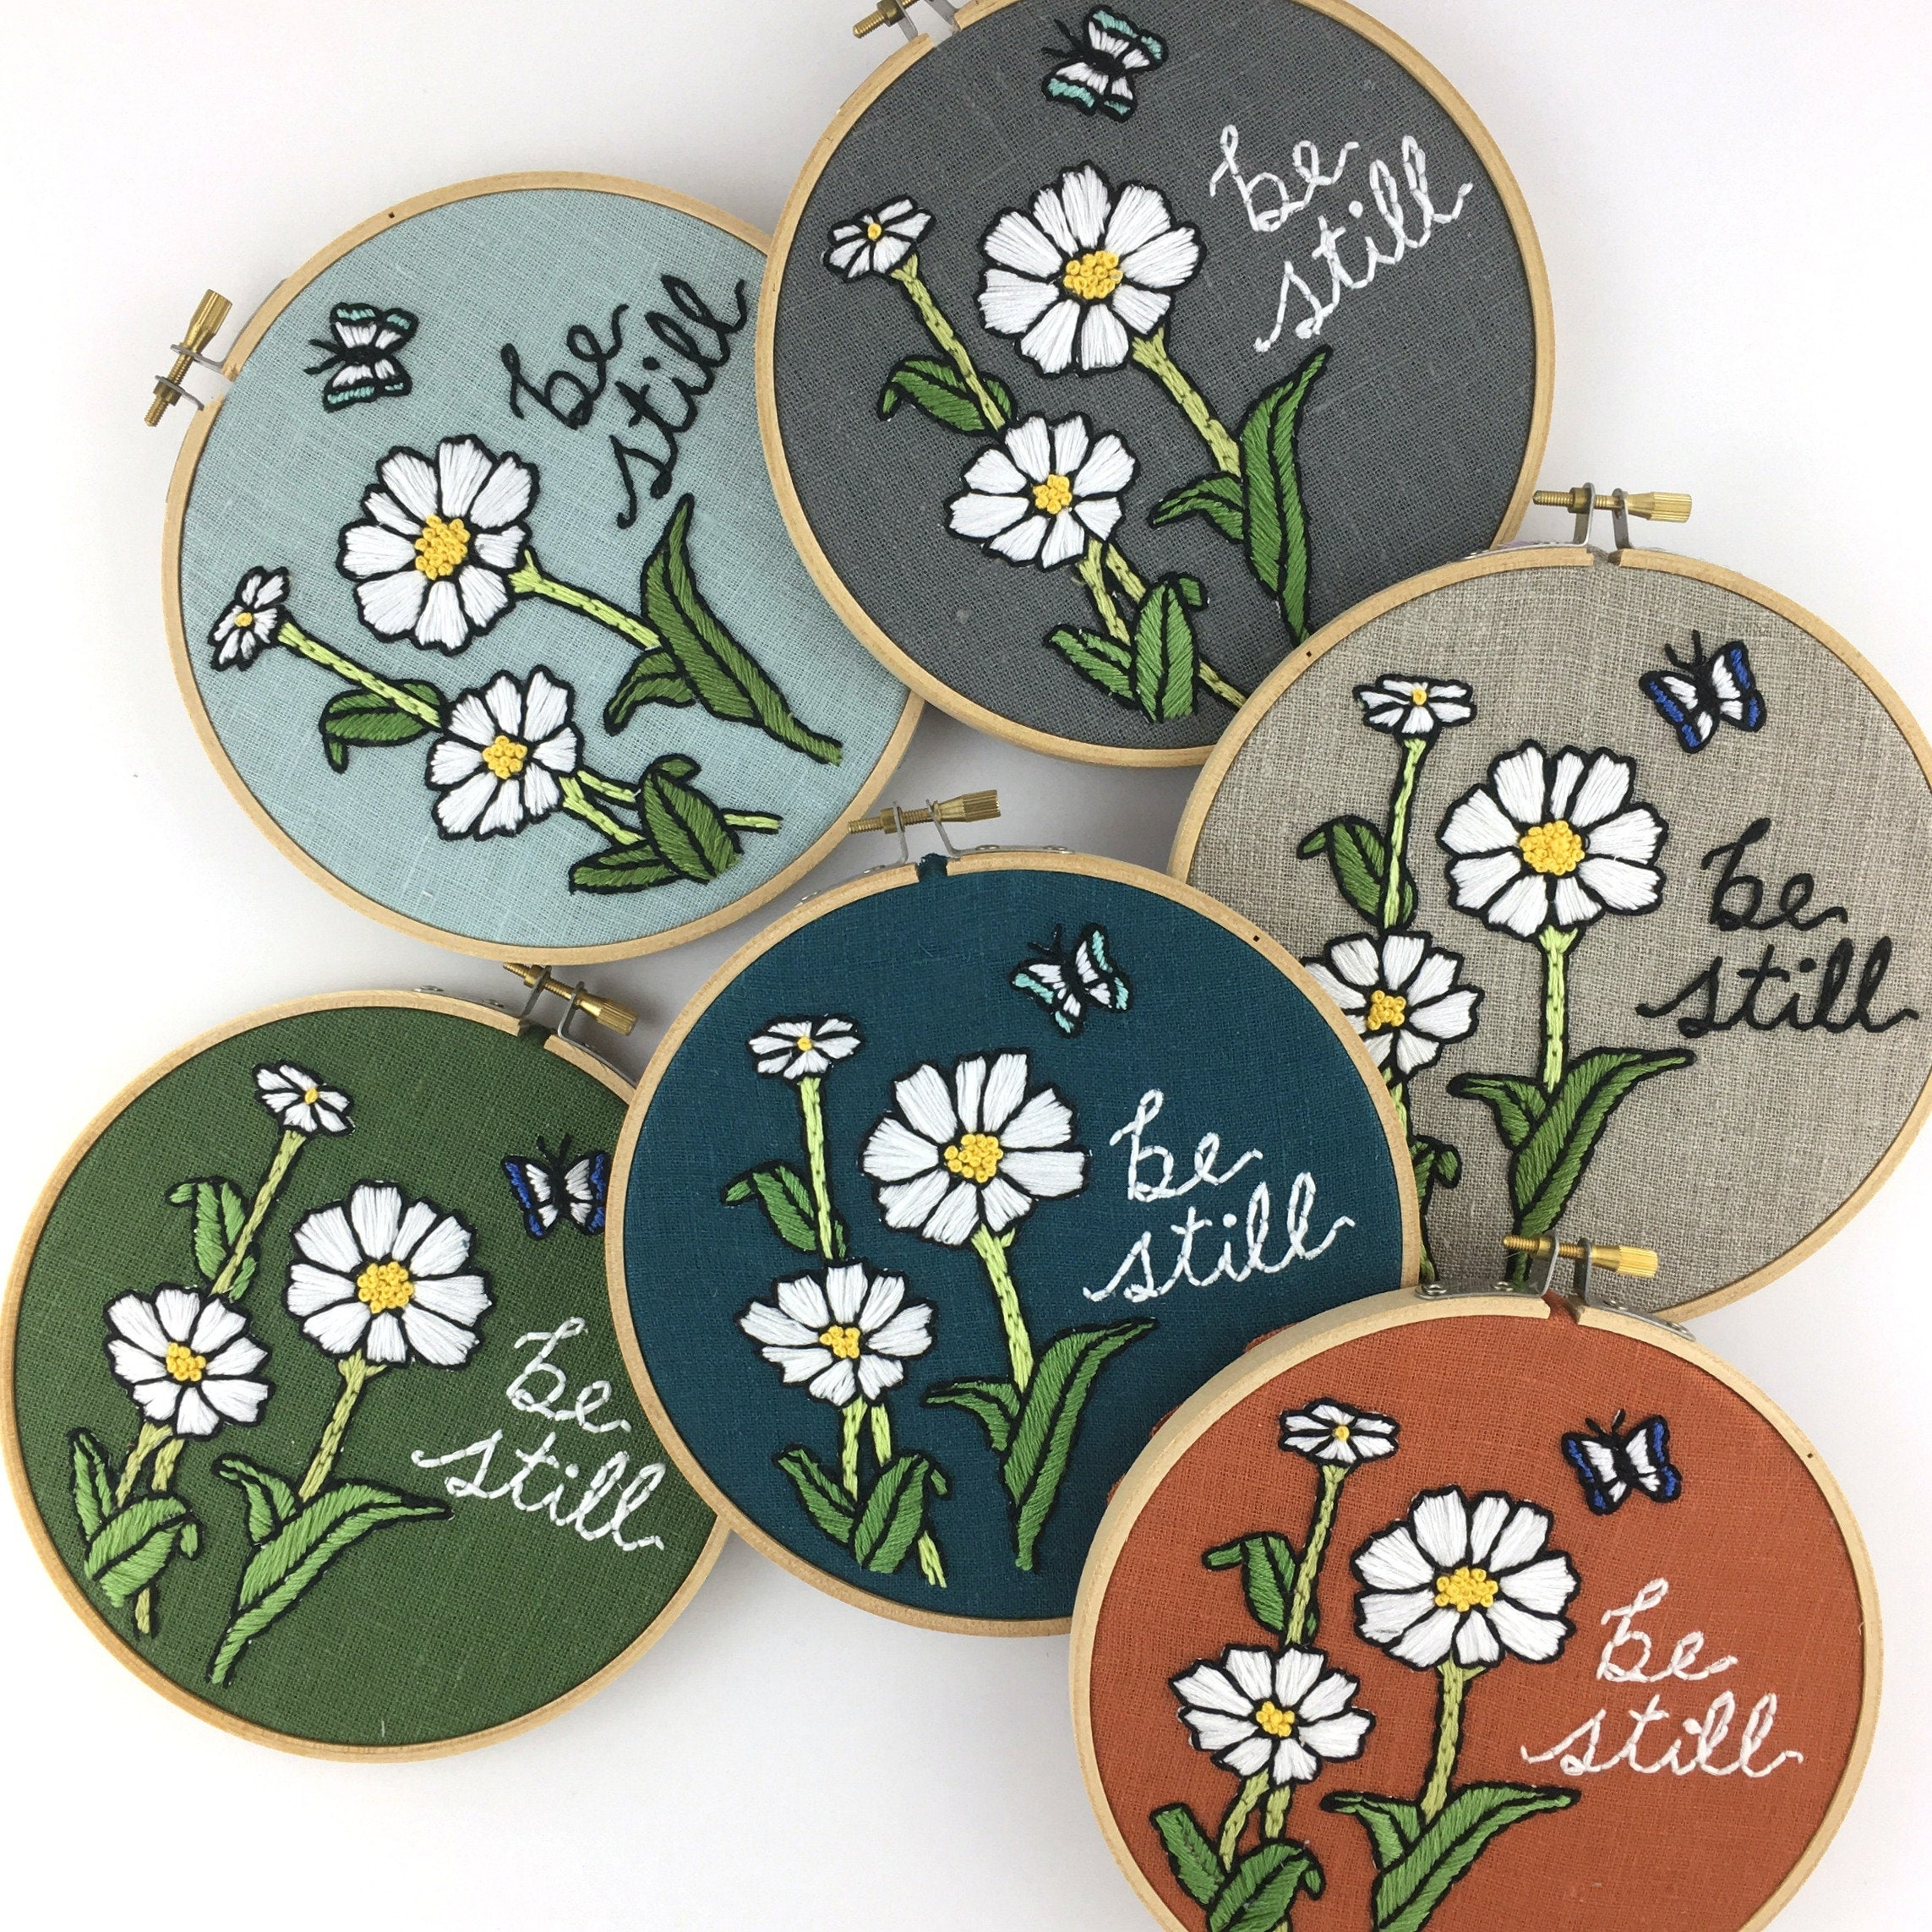 Diy Embroidery Patterns Be Still Embroidery Kit Easy Beginner Embroidery Kit Floral